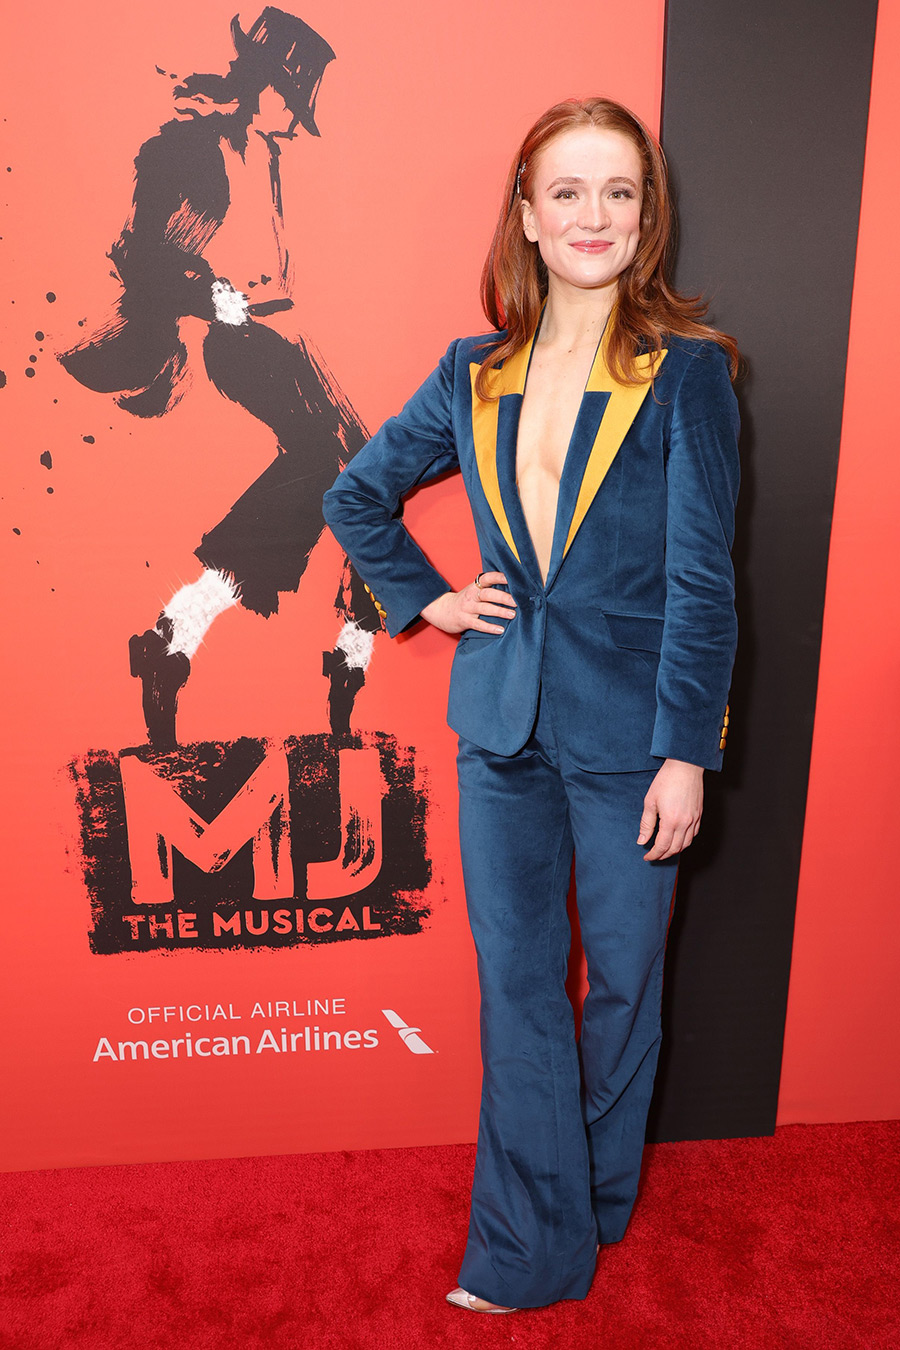 Kali May Grinder, an ensemble cast member of MJ the Musical, attends opening night at the Neil Simon Theatre in New York, NY, on February 1, 2022.